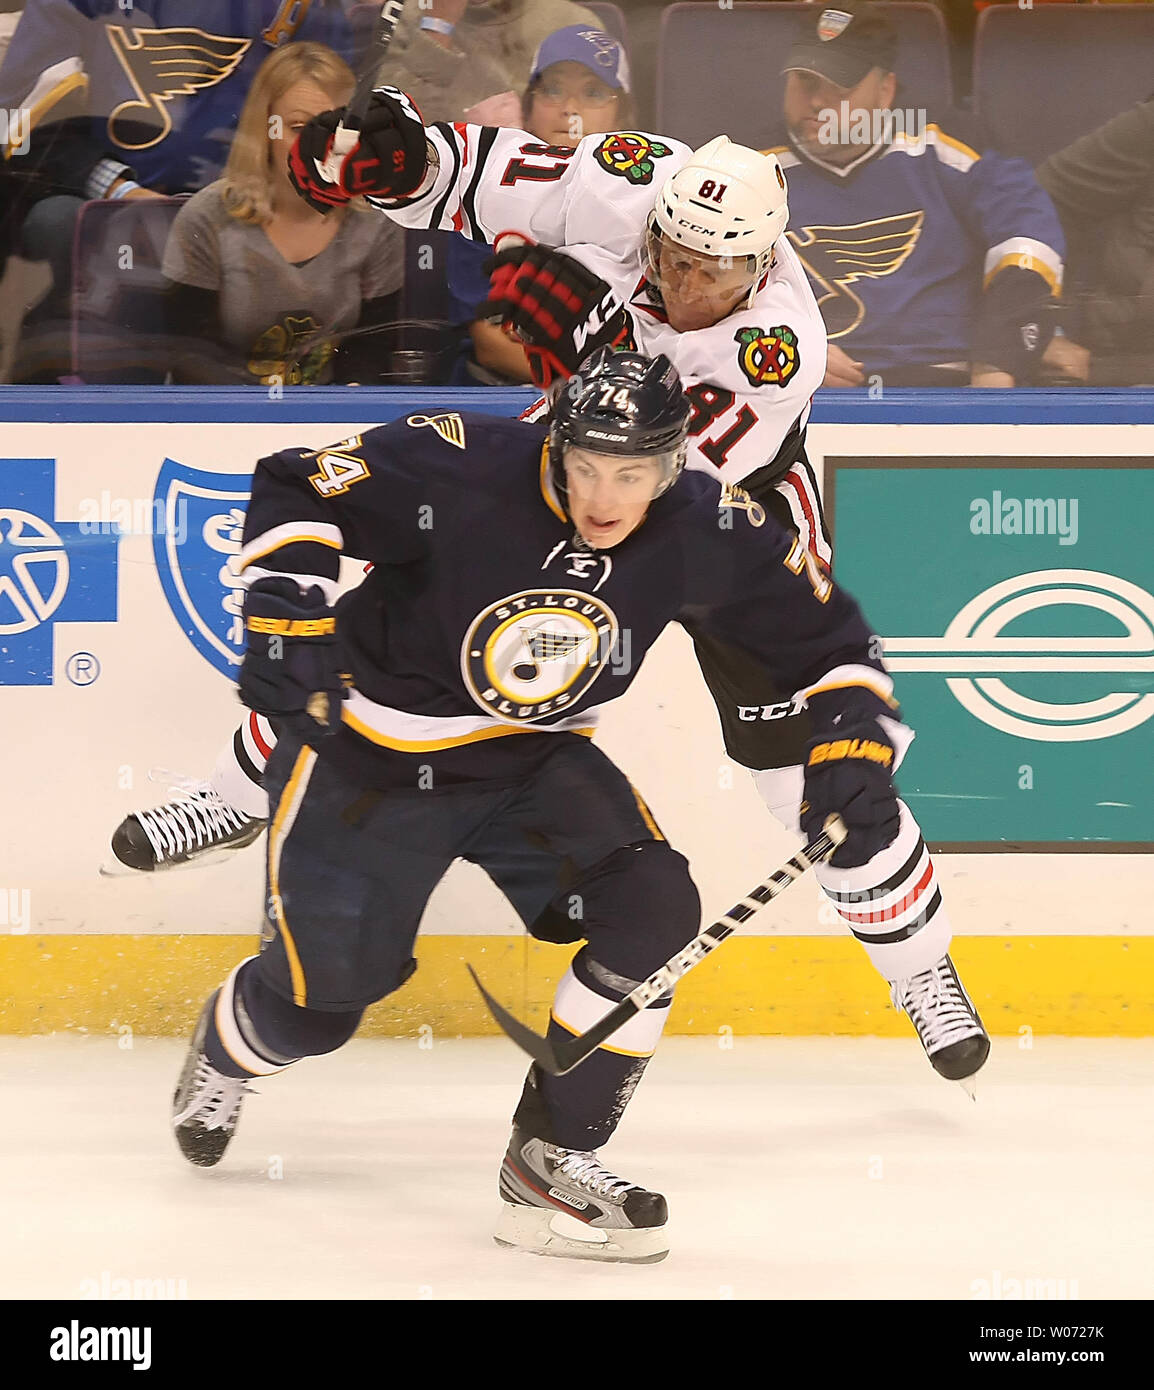 St. Louis Blues T. J. Oshie skates away after a hit along the boards from Chicago Blackhawks Marian Hossa(81) during the first period at the Scottrade Center in St. Louis on December 3rd 2011. UPI/John Boman Jr Stock Photo